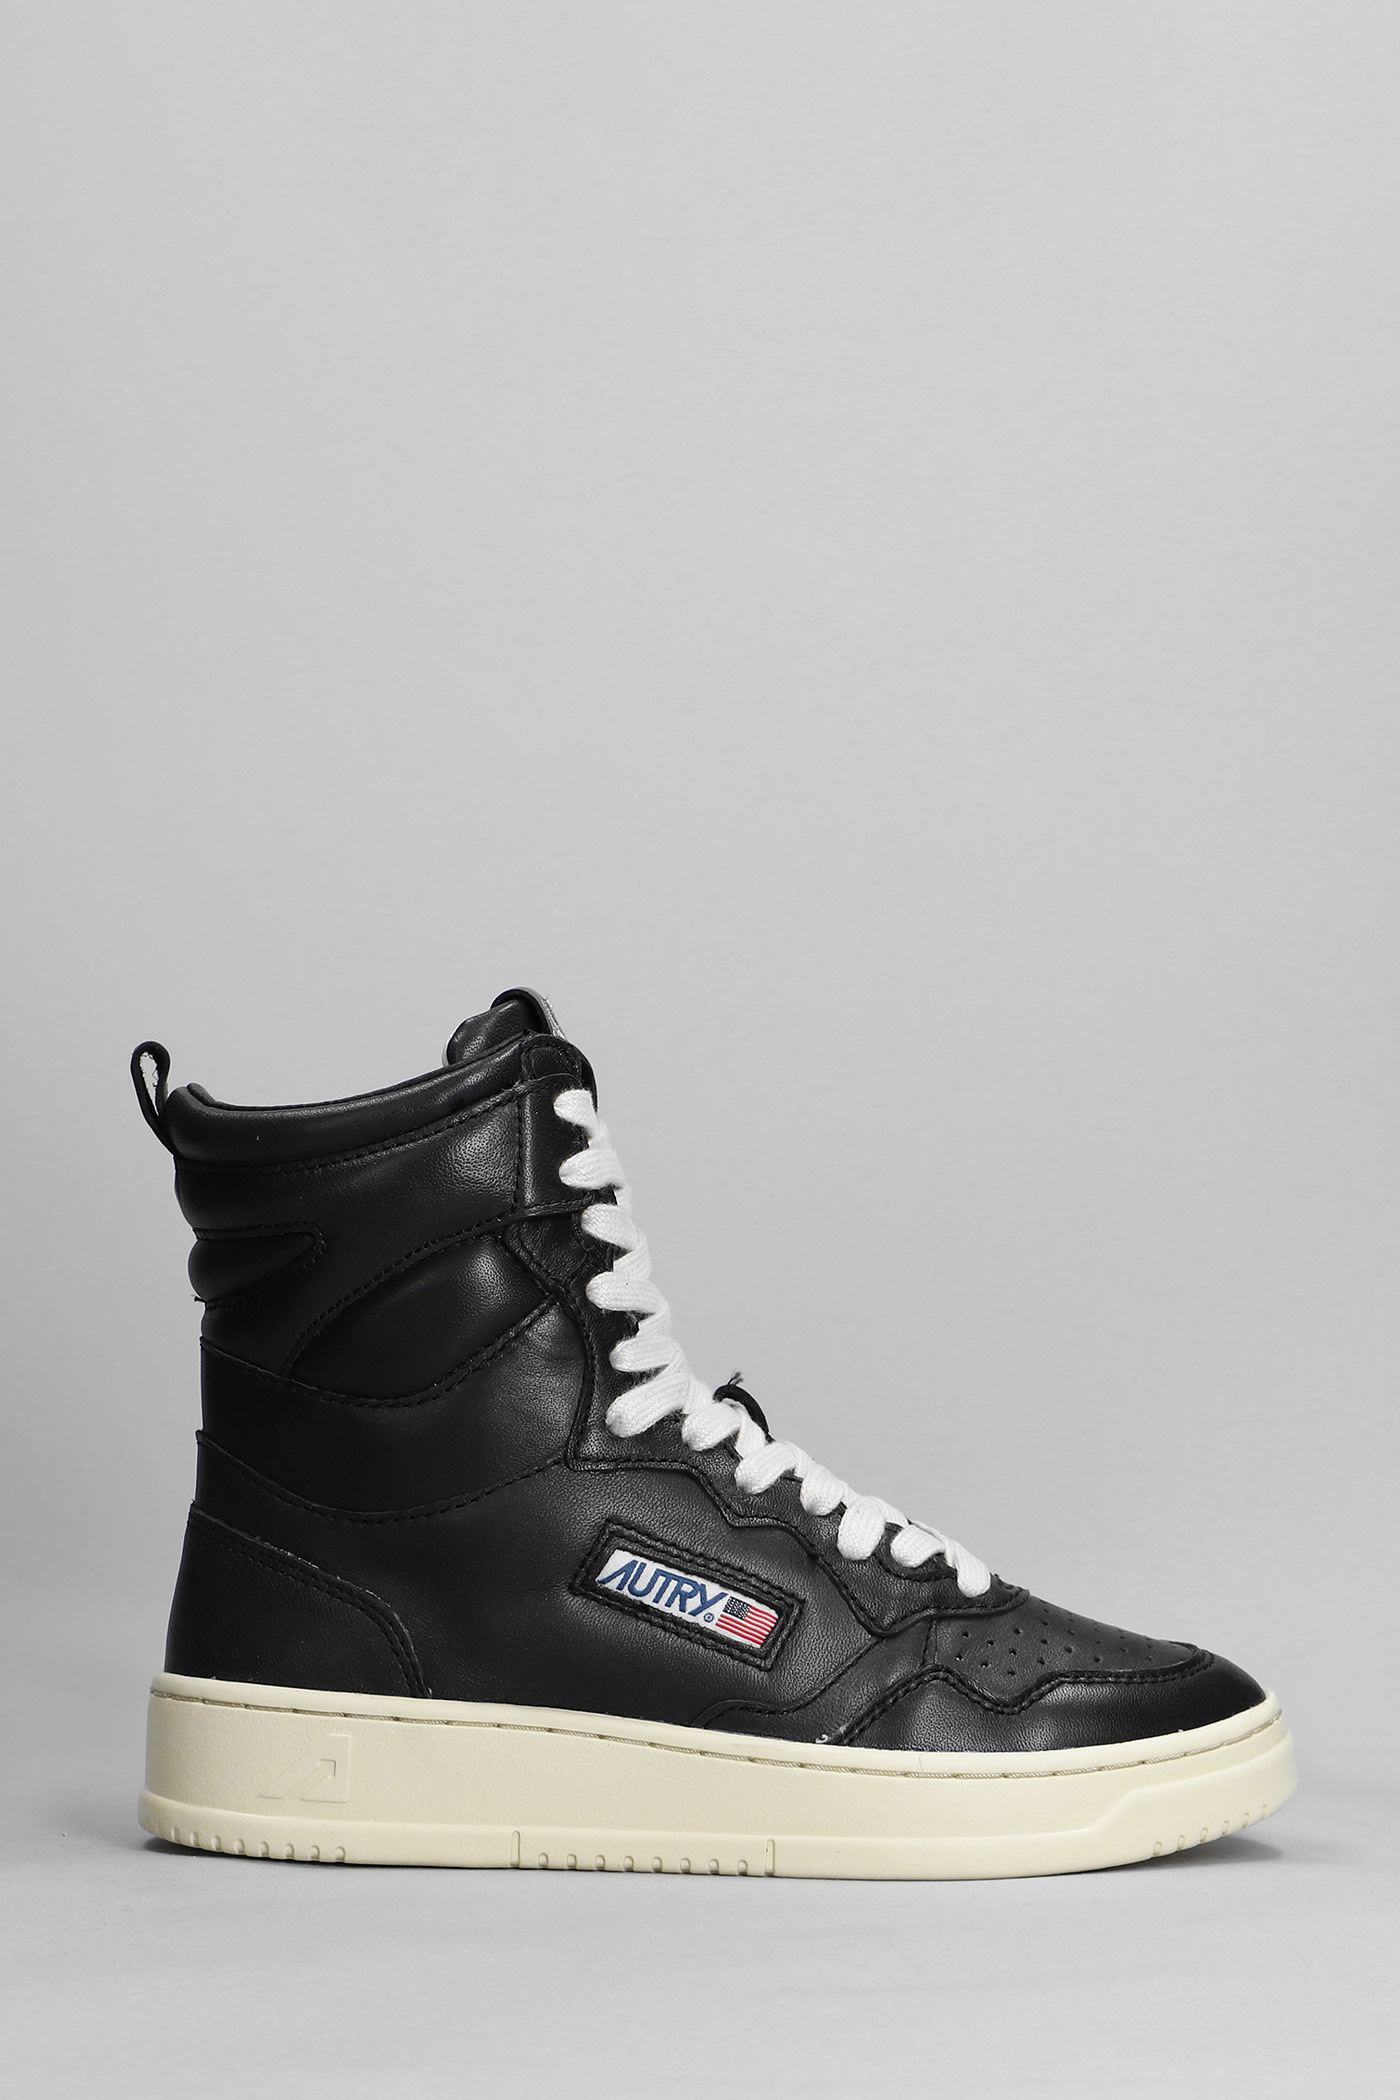 Autry Big One Sneakers In Black Leather